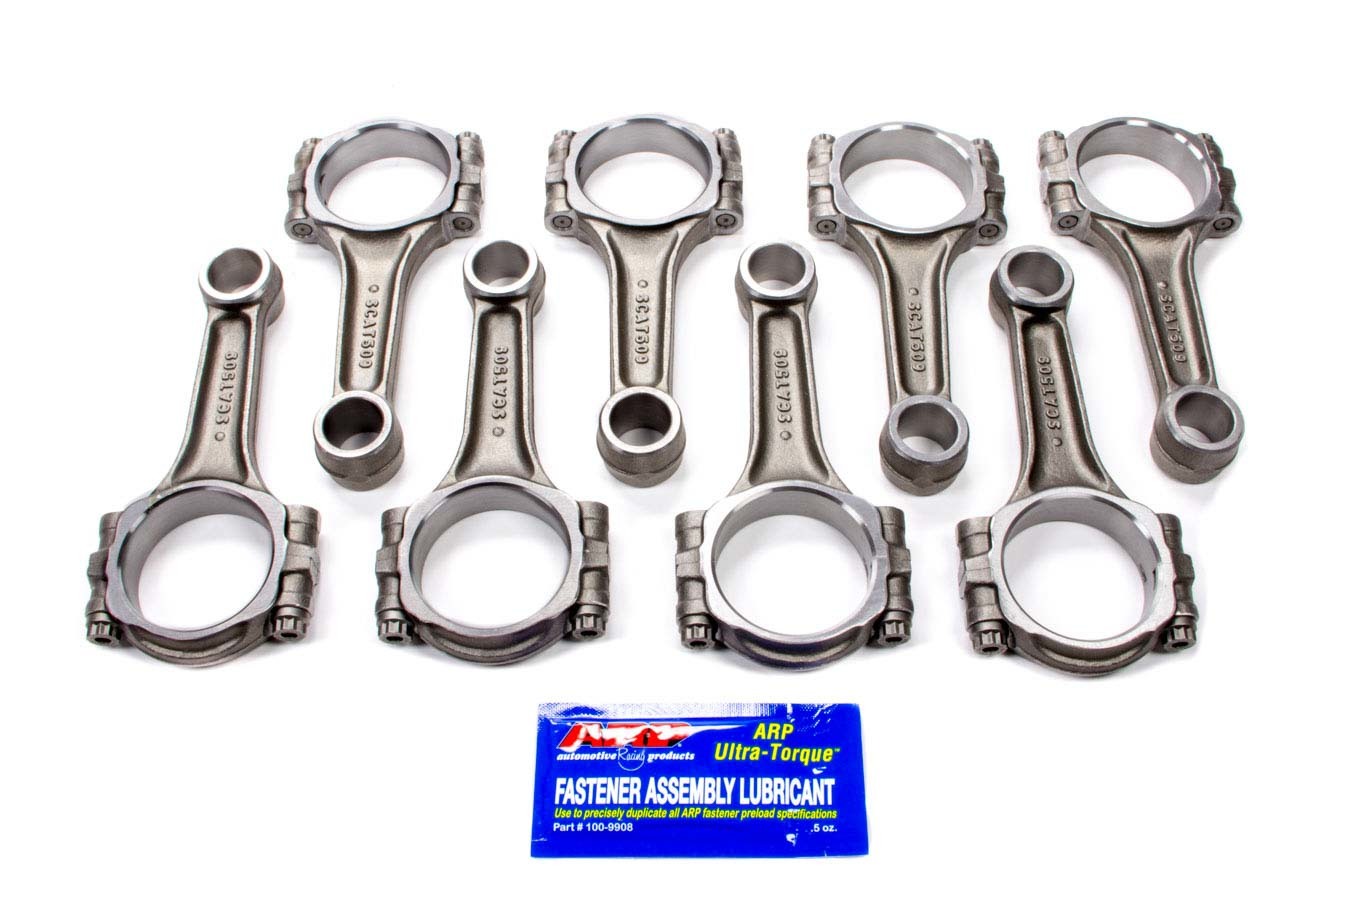 Scat 2-ICR5090P Connecting Rod, Pro Stock, I Beam, 5.090 in Long, Press Fit, 3/8 in Cap Screws, ARP8740, Forged Steel, Small Block Ford, Set of 8